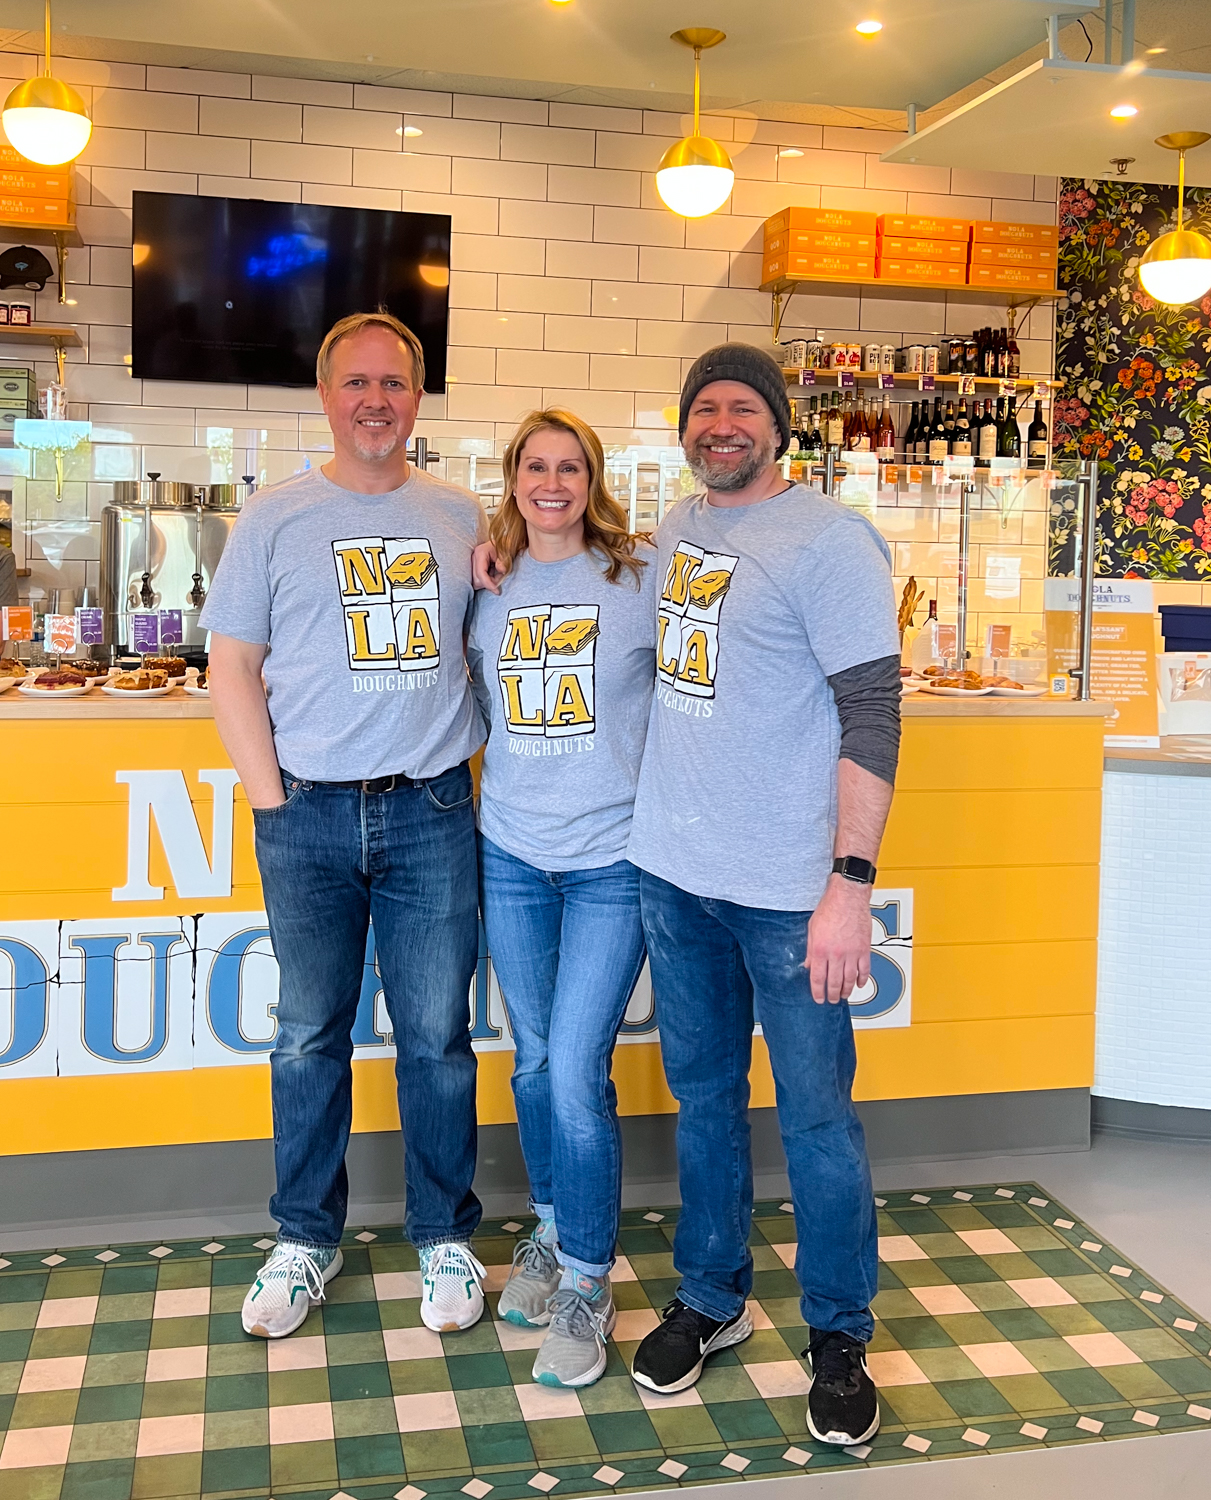 The Doughnut Decadence Expansion – NOLA Doughnuts Goes to Beaverton, Oregon For Their Third Location! This is Culinary Treasure by Steven Shomler